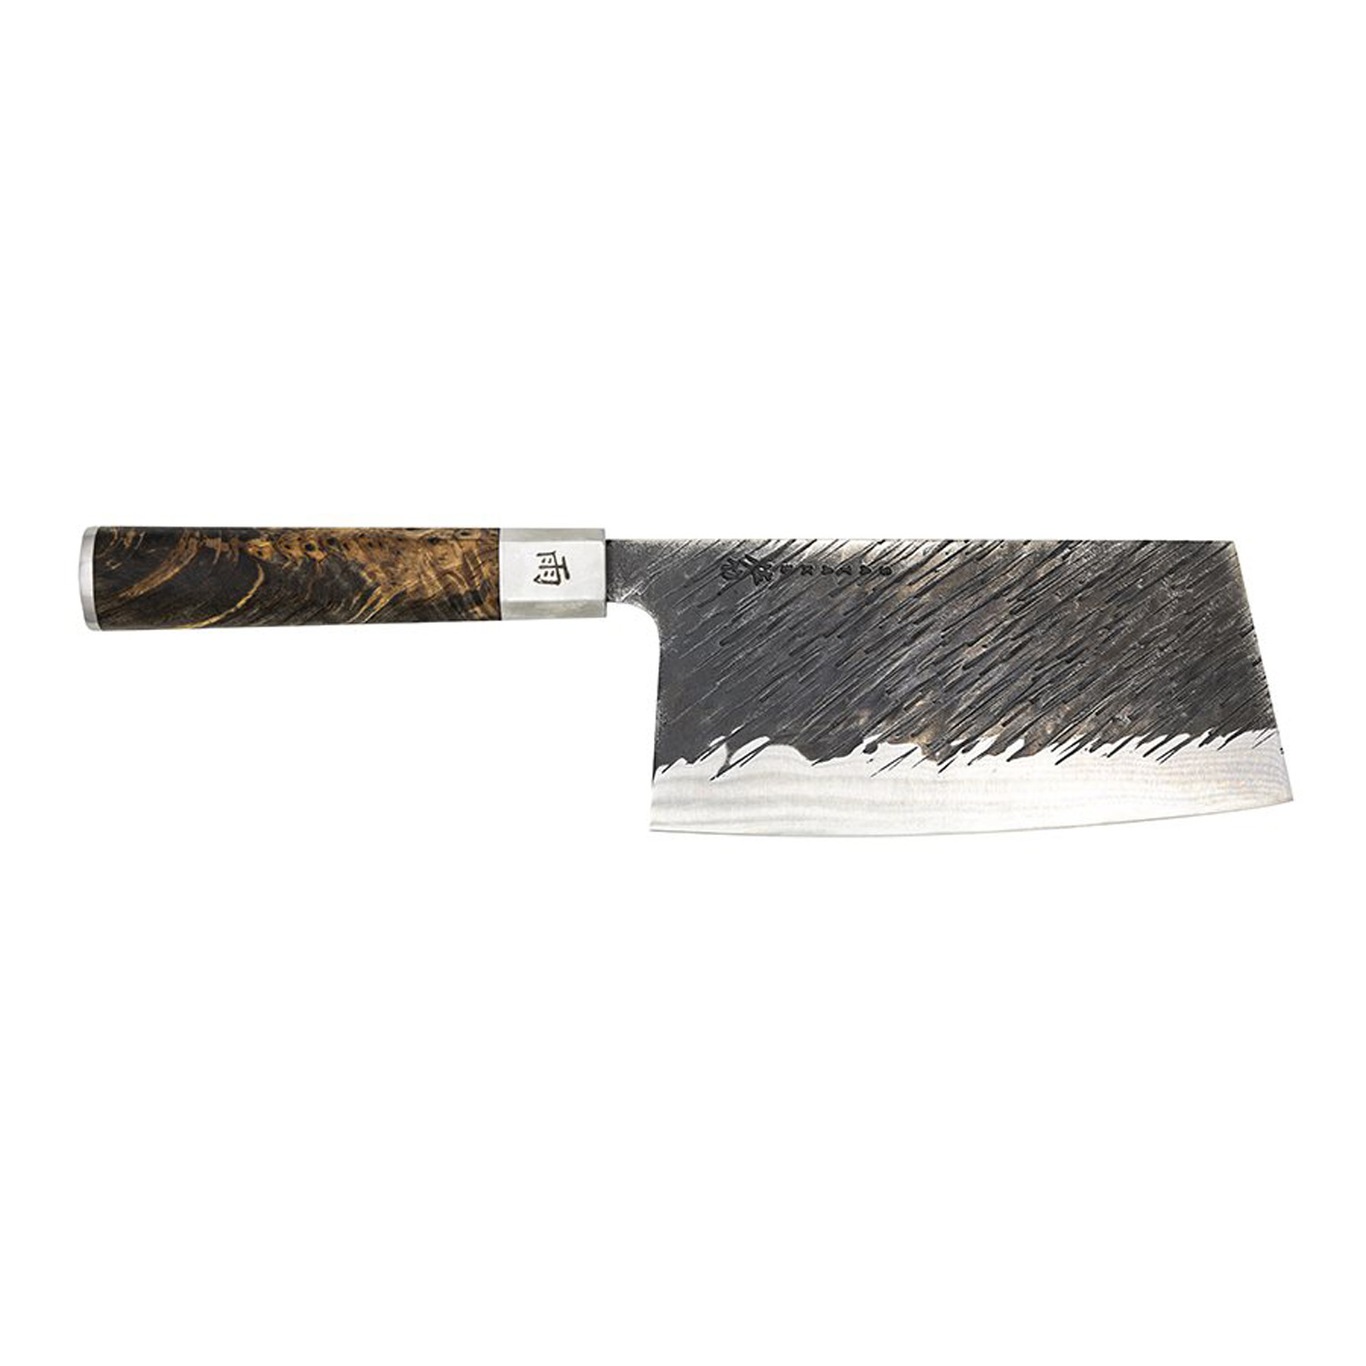 Ame Chinese Chef Knife, 17 cm